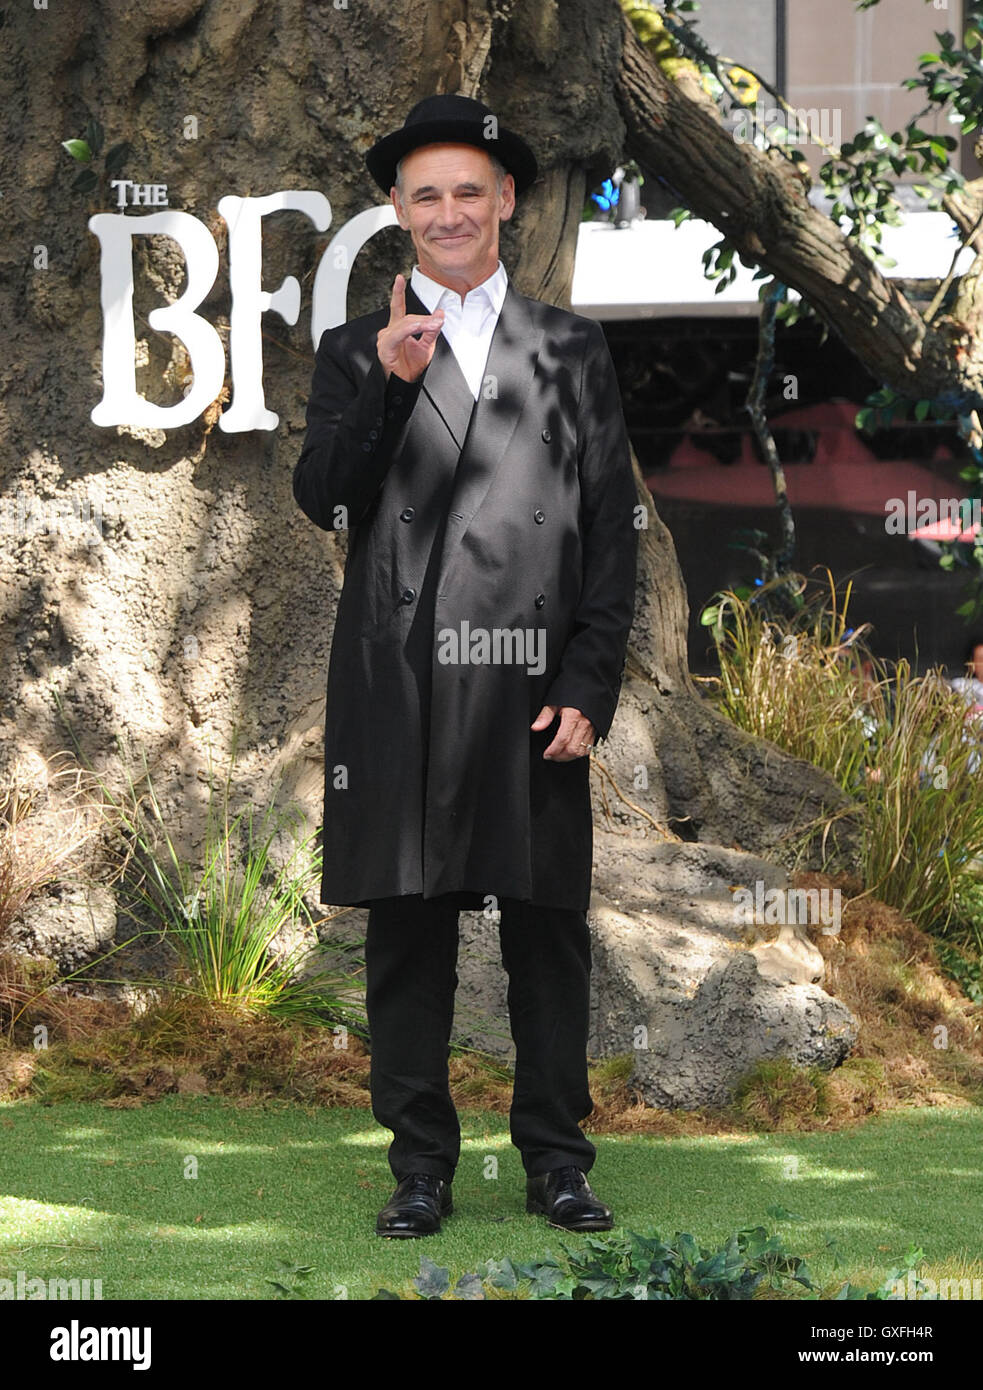 UK premiere of 'The BFG' held at Odeon Leicester Square - Arrivals  Featuring: Mark Rylance Where: London, United Kingdom When: 17 Jul 2016 Stock Photo